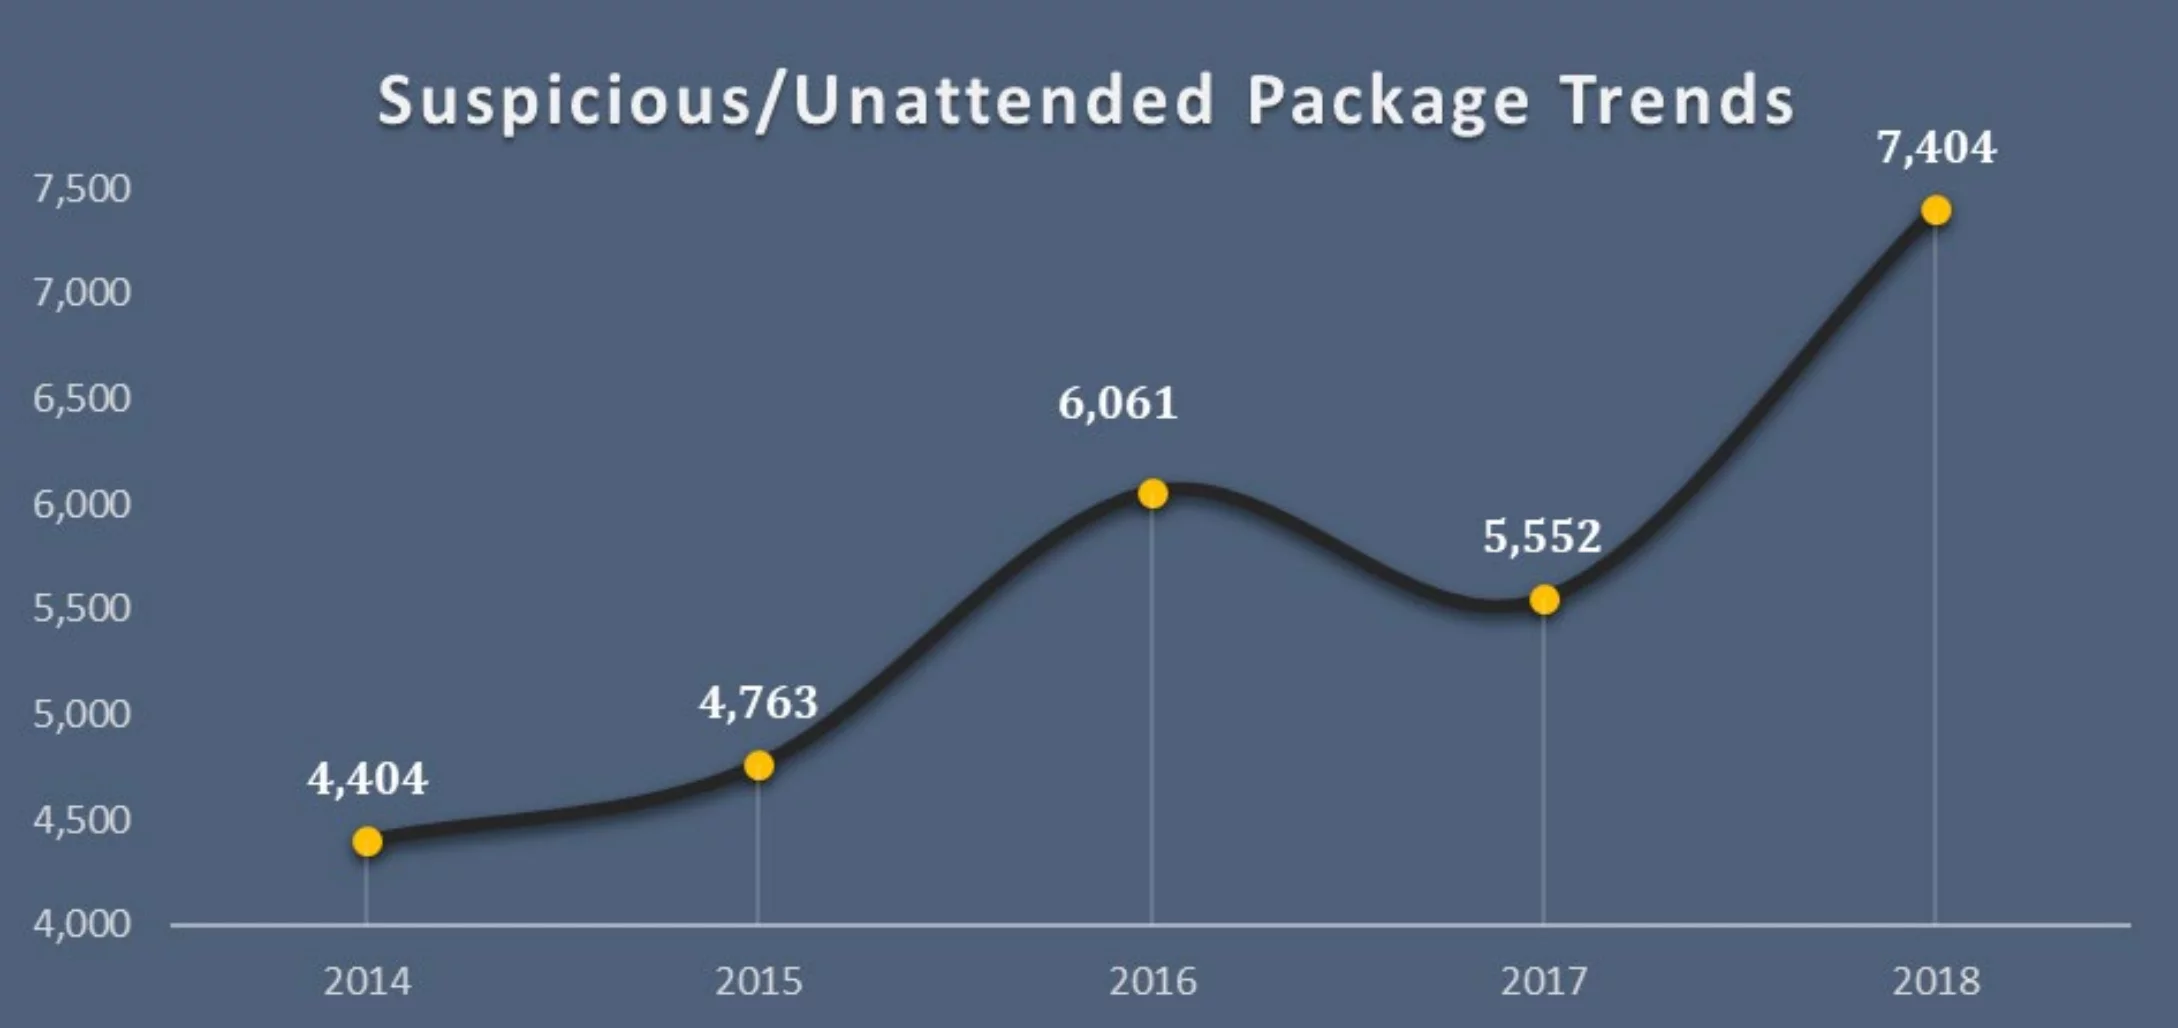 Graph showing suspicious package trends going up over the years of 2014 to 2018